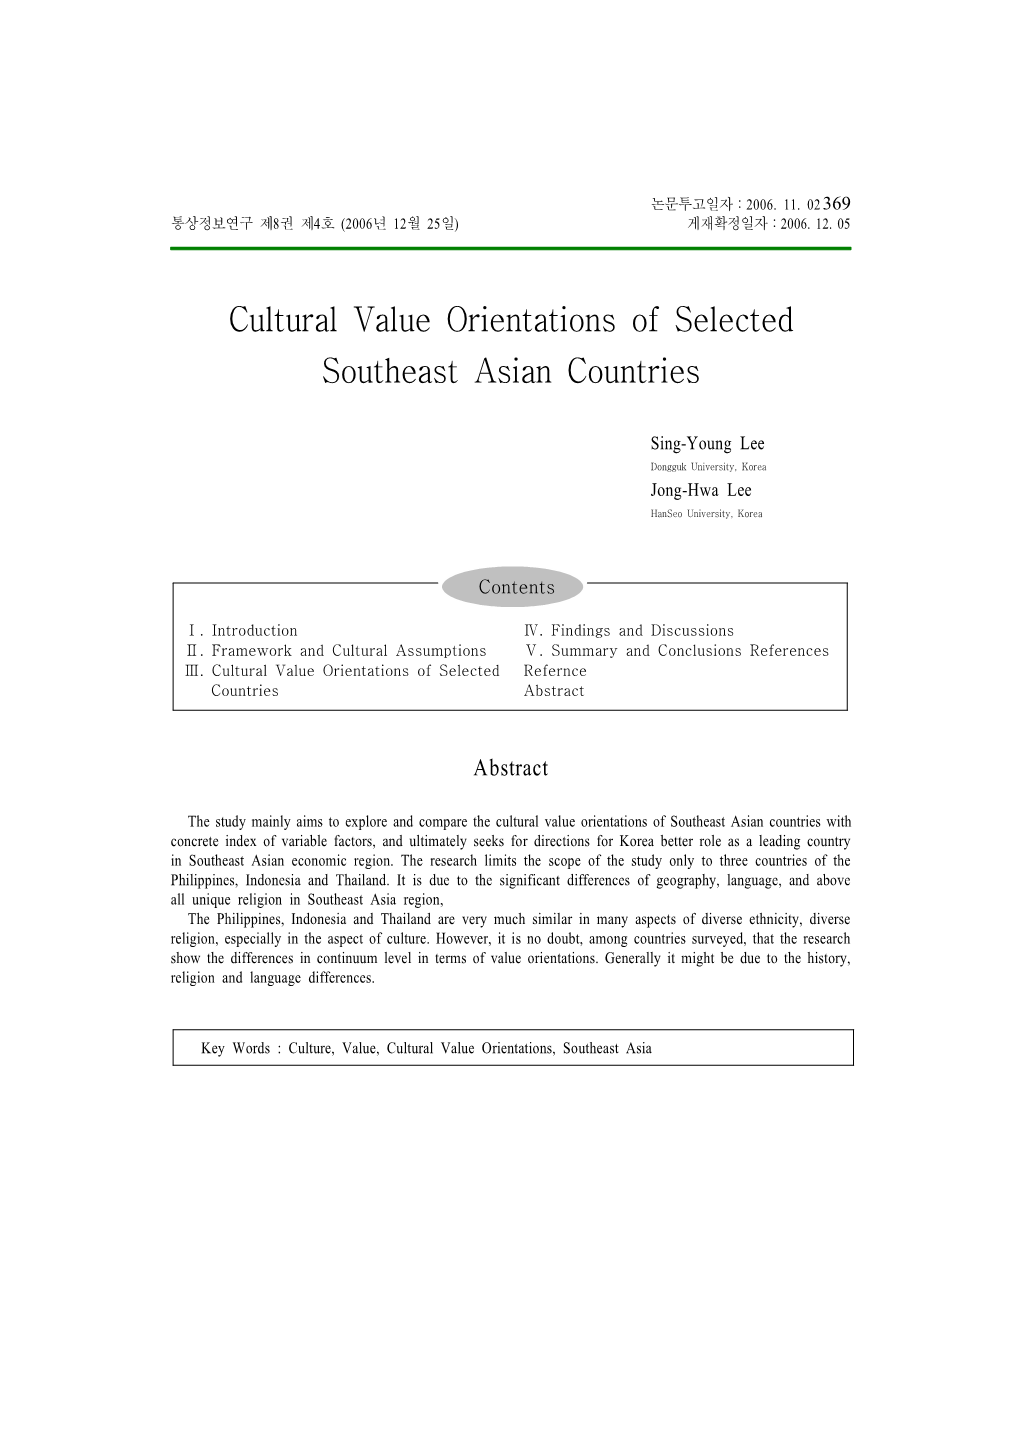 Cultural Value Orientations of Selected Southeast Asian Countries